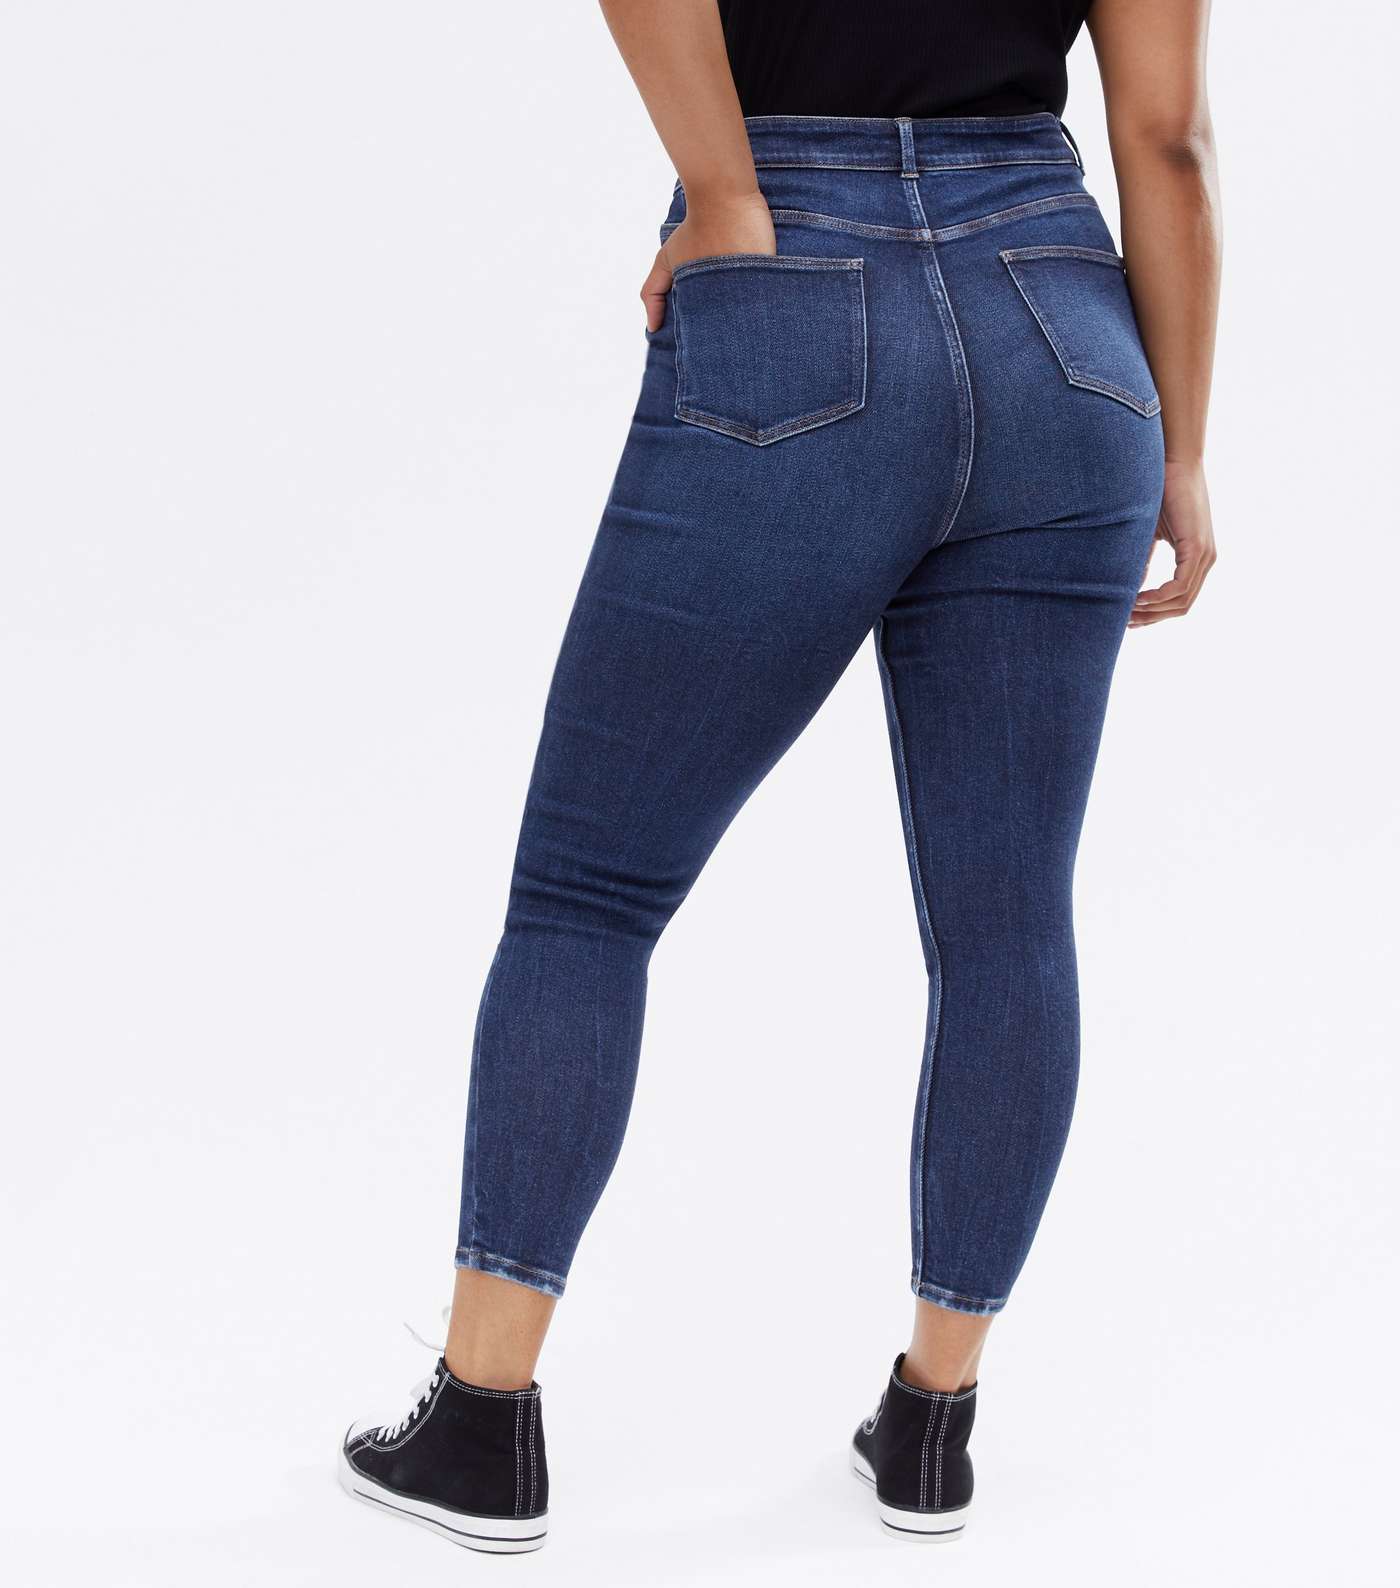 Curves Blue Rinse Wash Ripped Knee High Waist Hallie Super Skinny Jeans Image 3